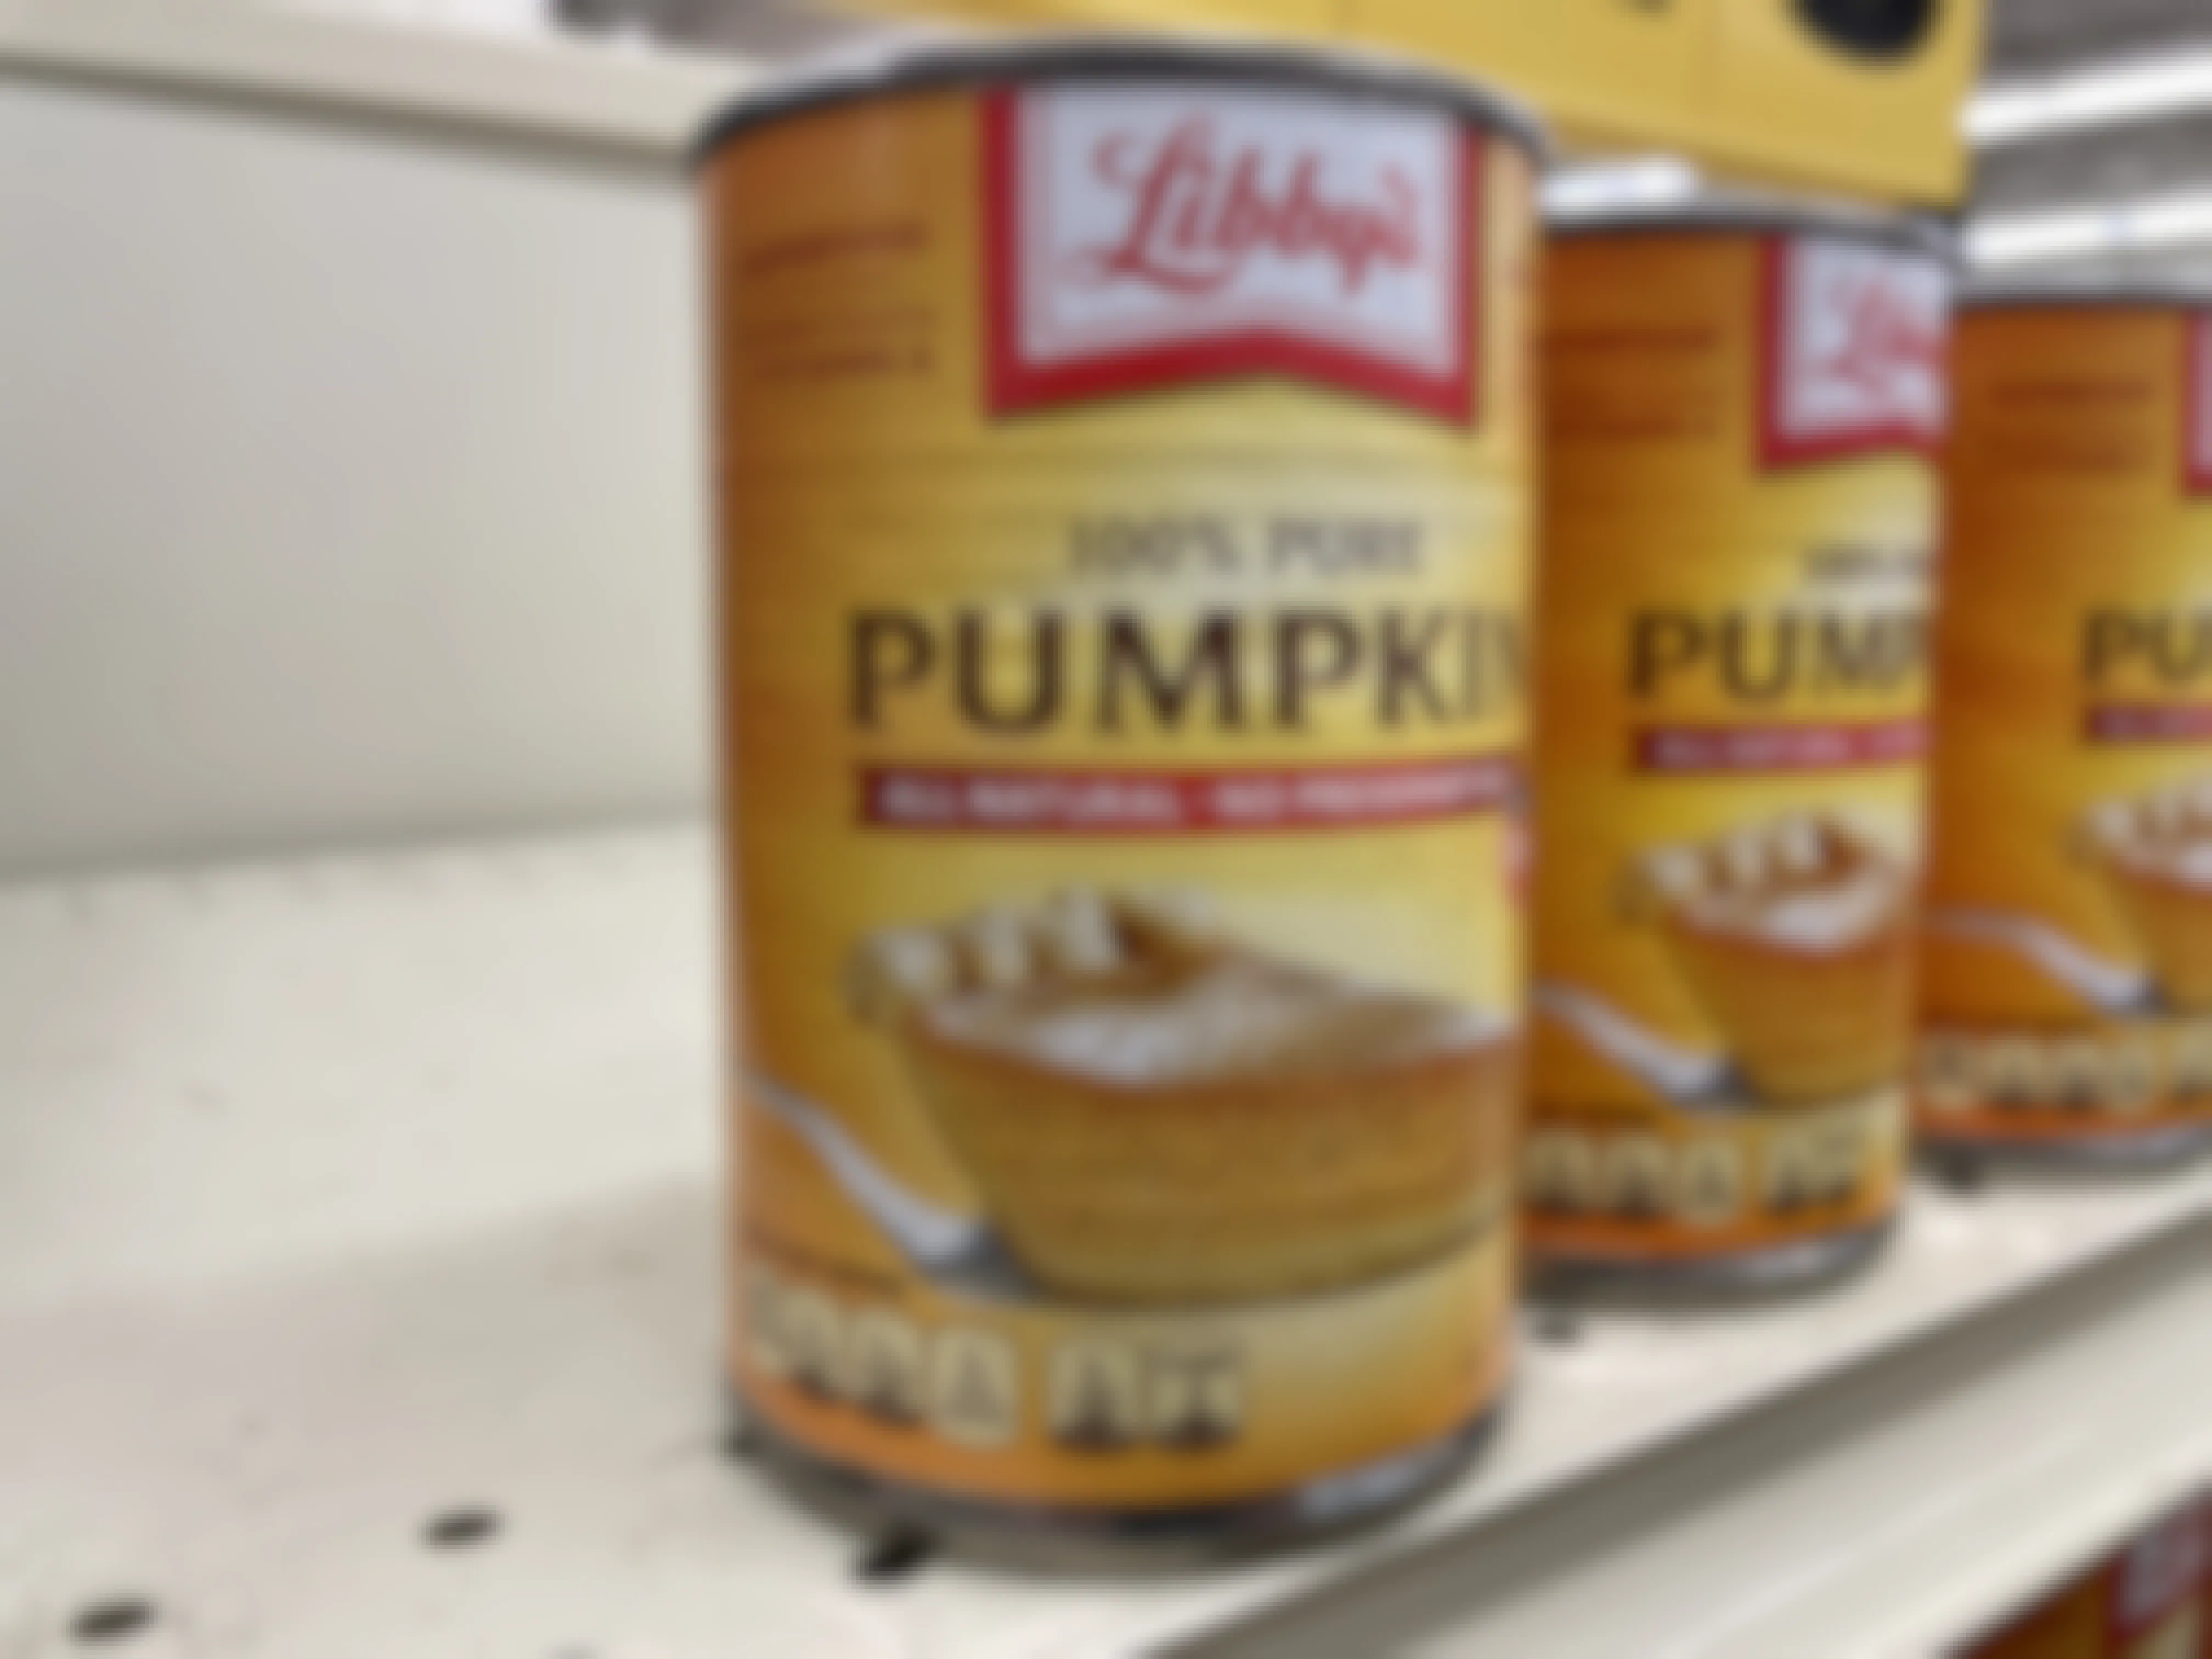 Three cans of Libby's canned pumpkin on a store shelf.